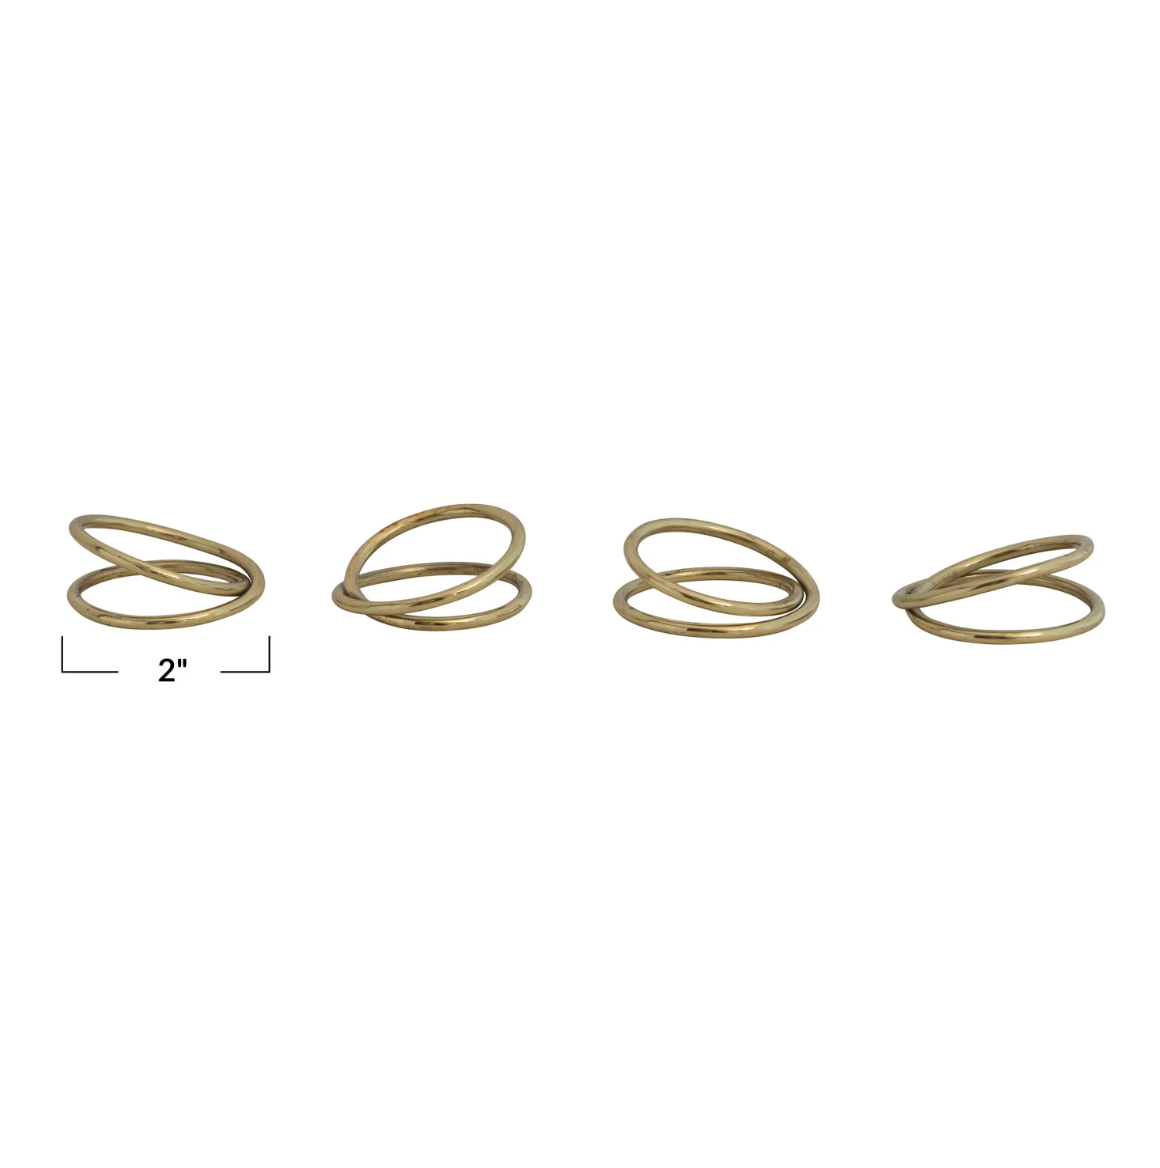 Brass Napkin Rings on Leather Tie, Set of 4